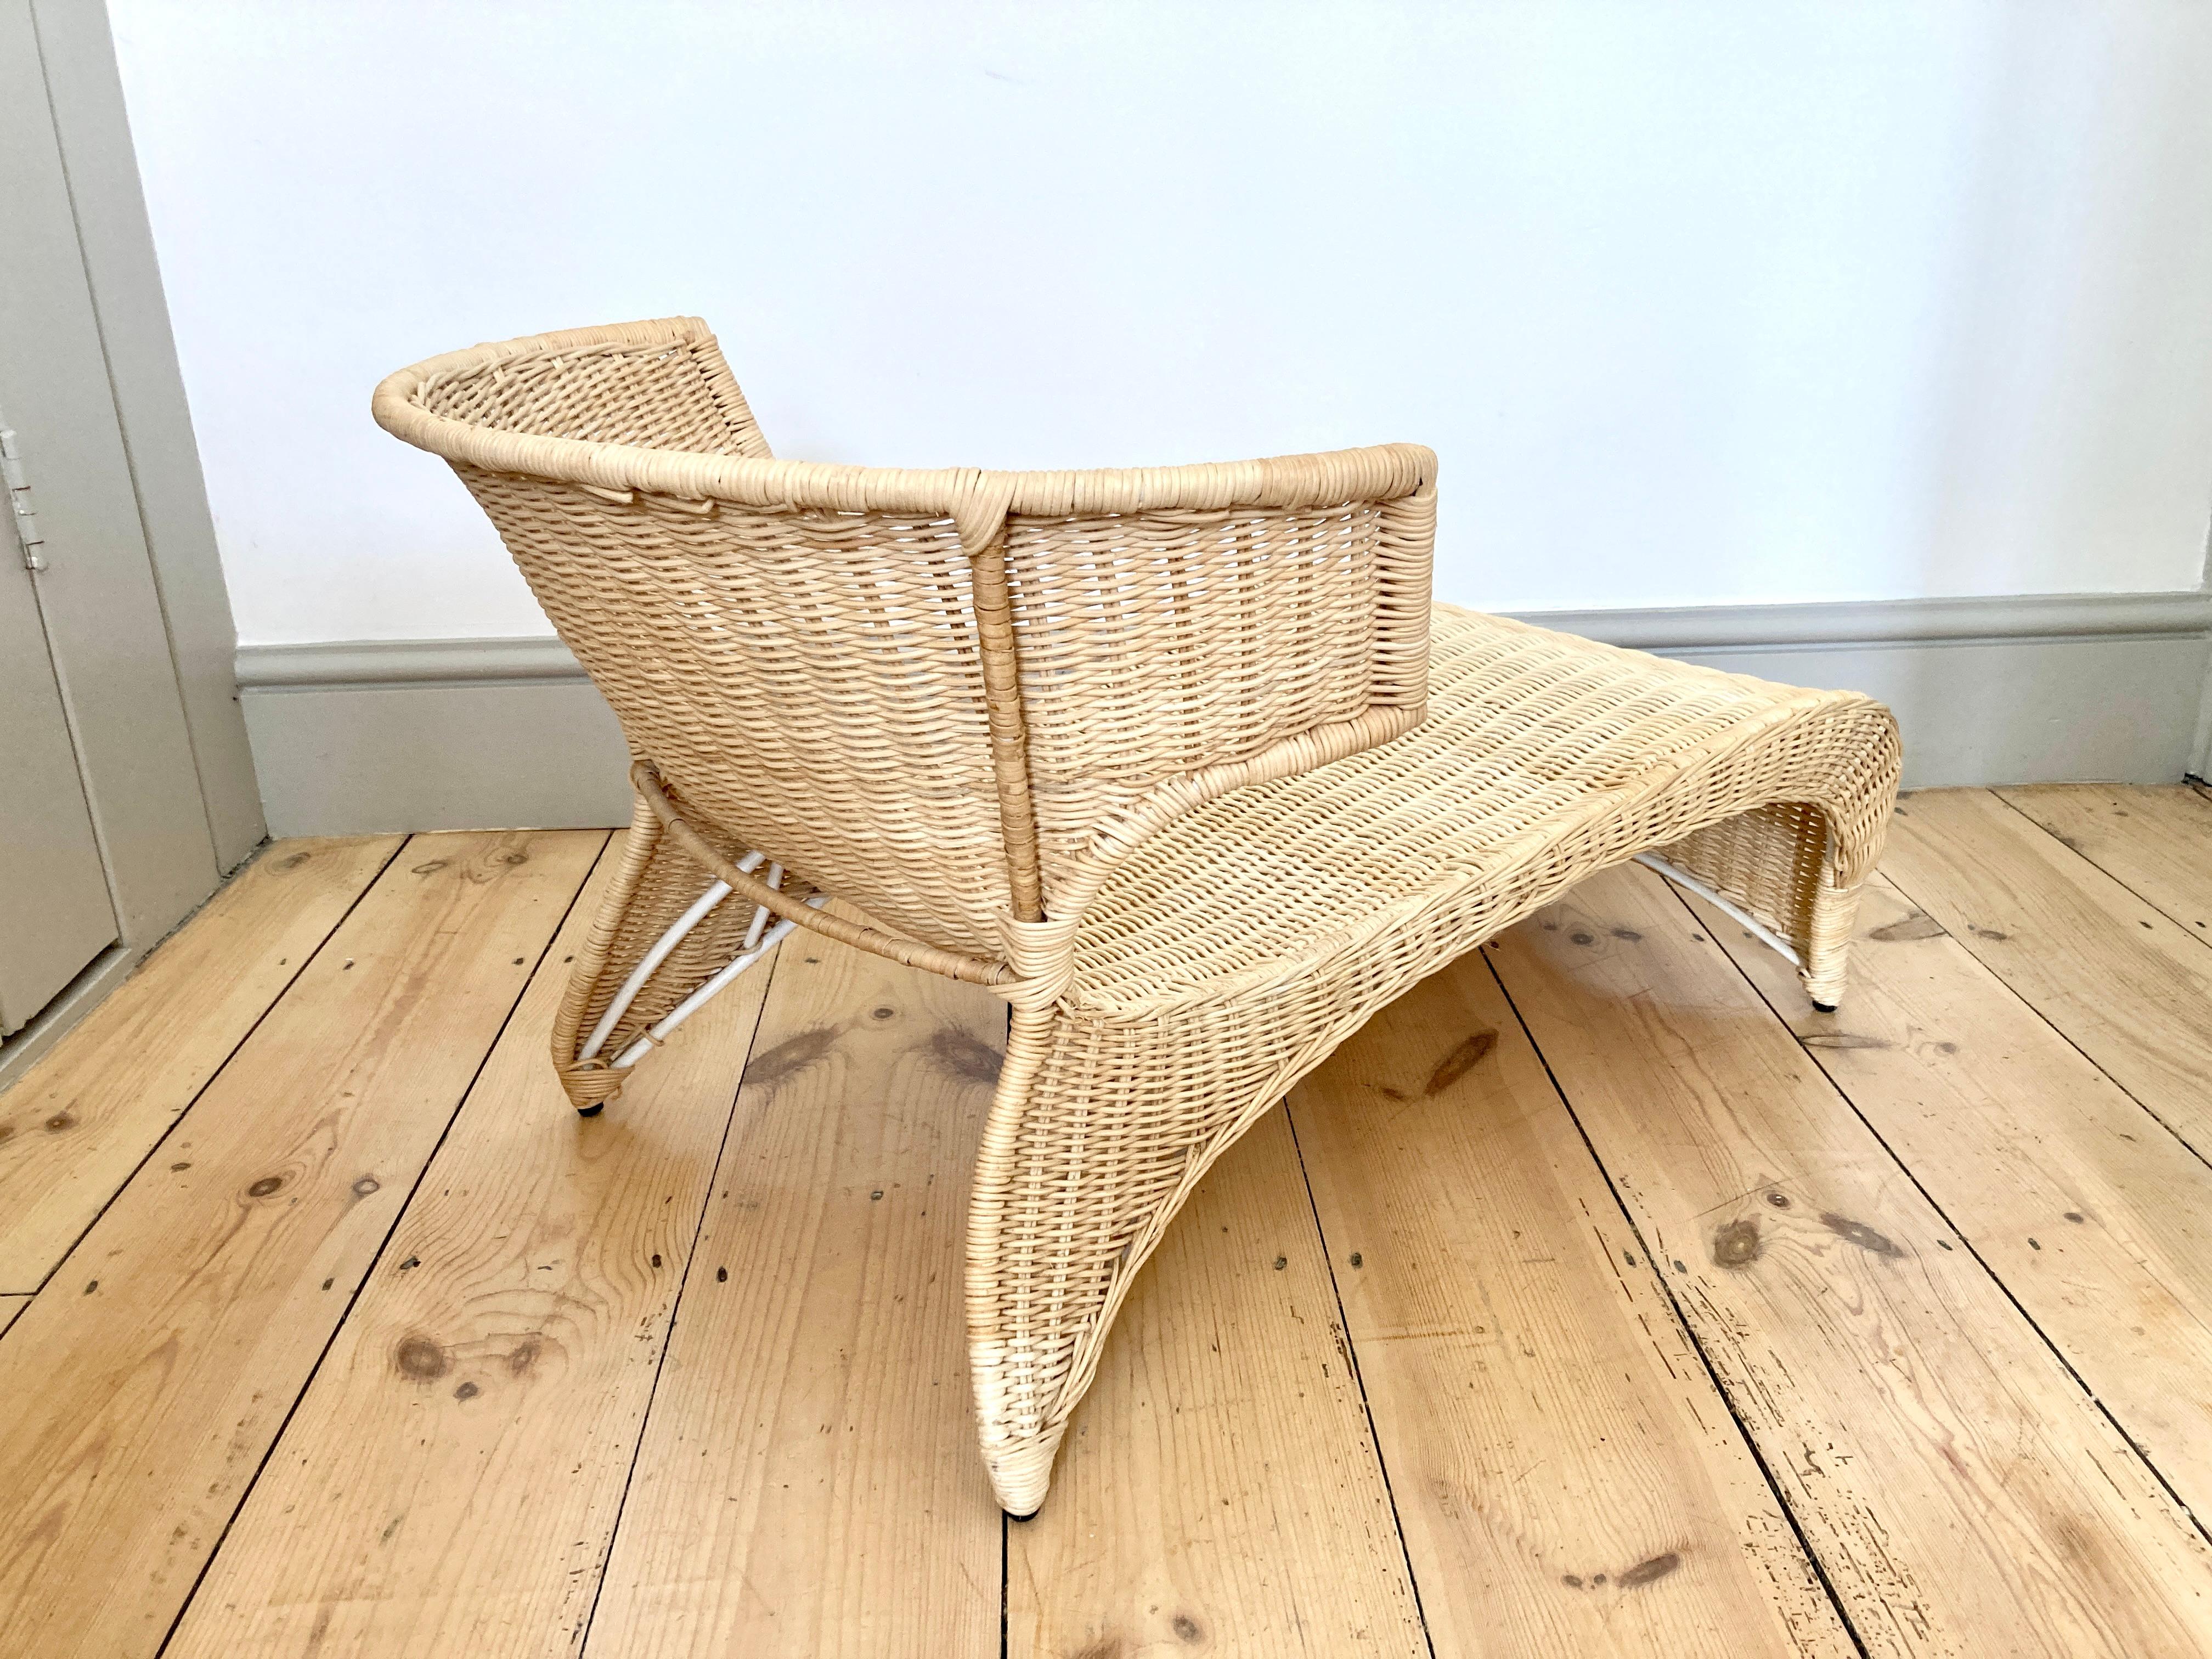 Low Lounge Chair / Chaise Longue by Monika Mulder for Ikea Savo Natural Rattan 6